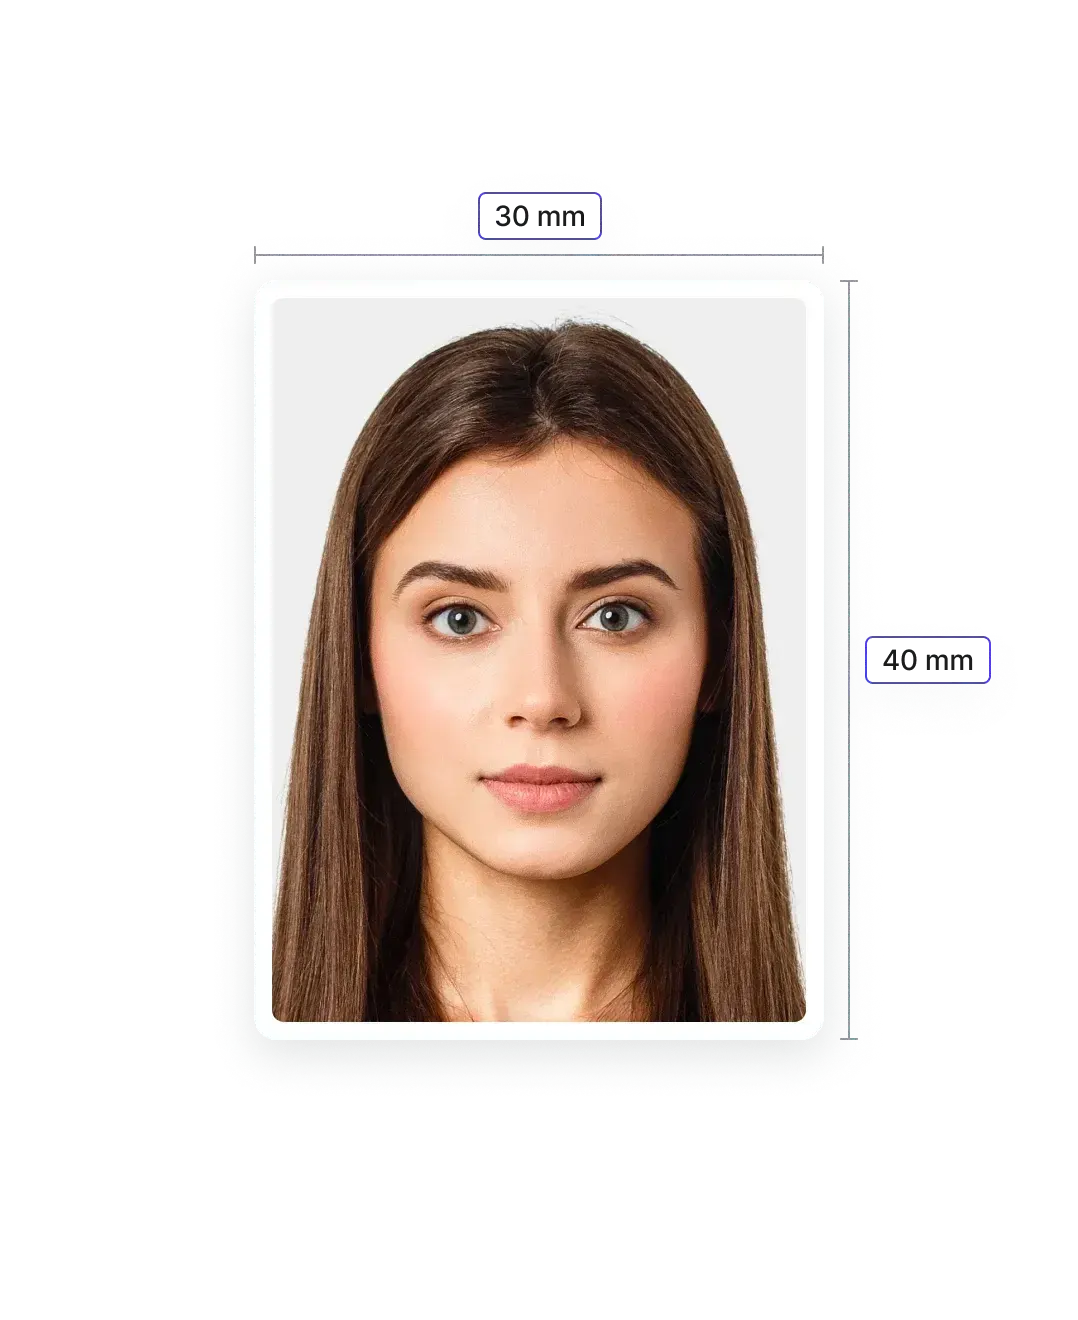 Romania Visa Photo: Size and Requirements